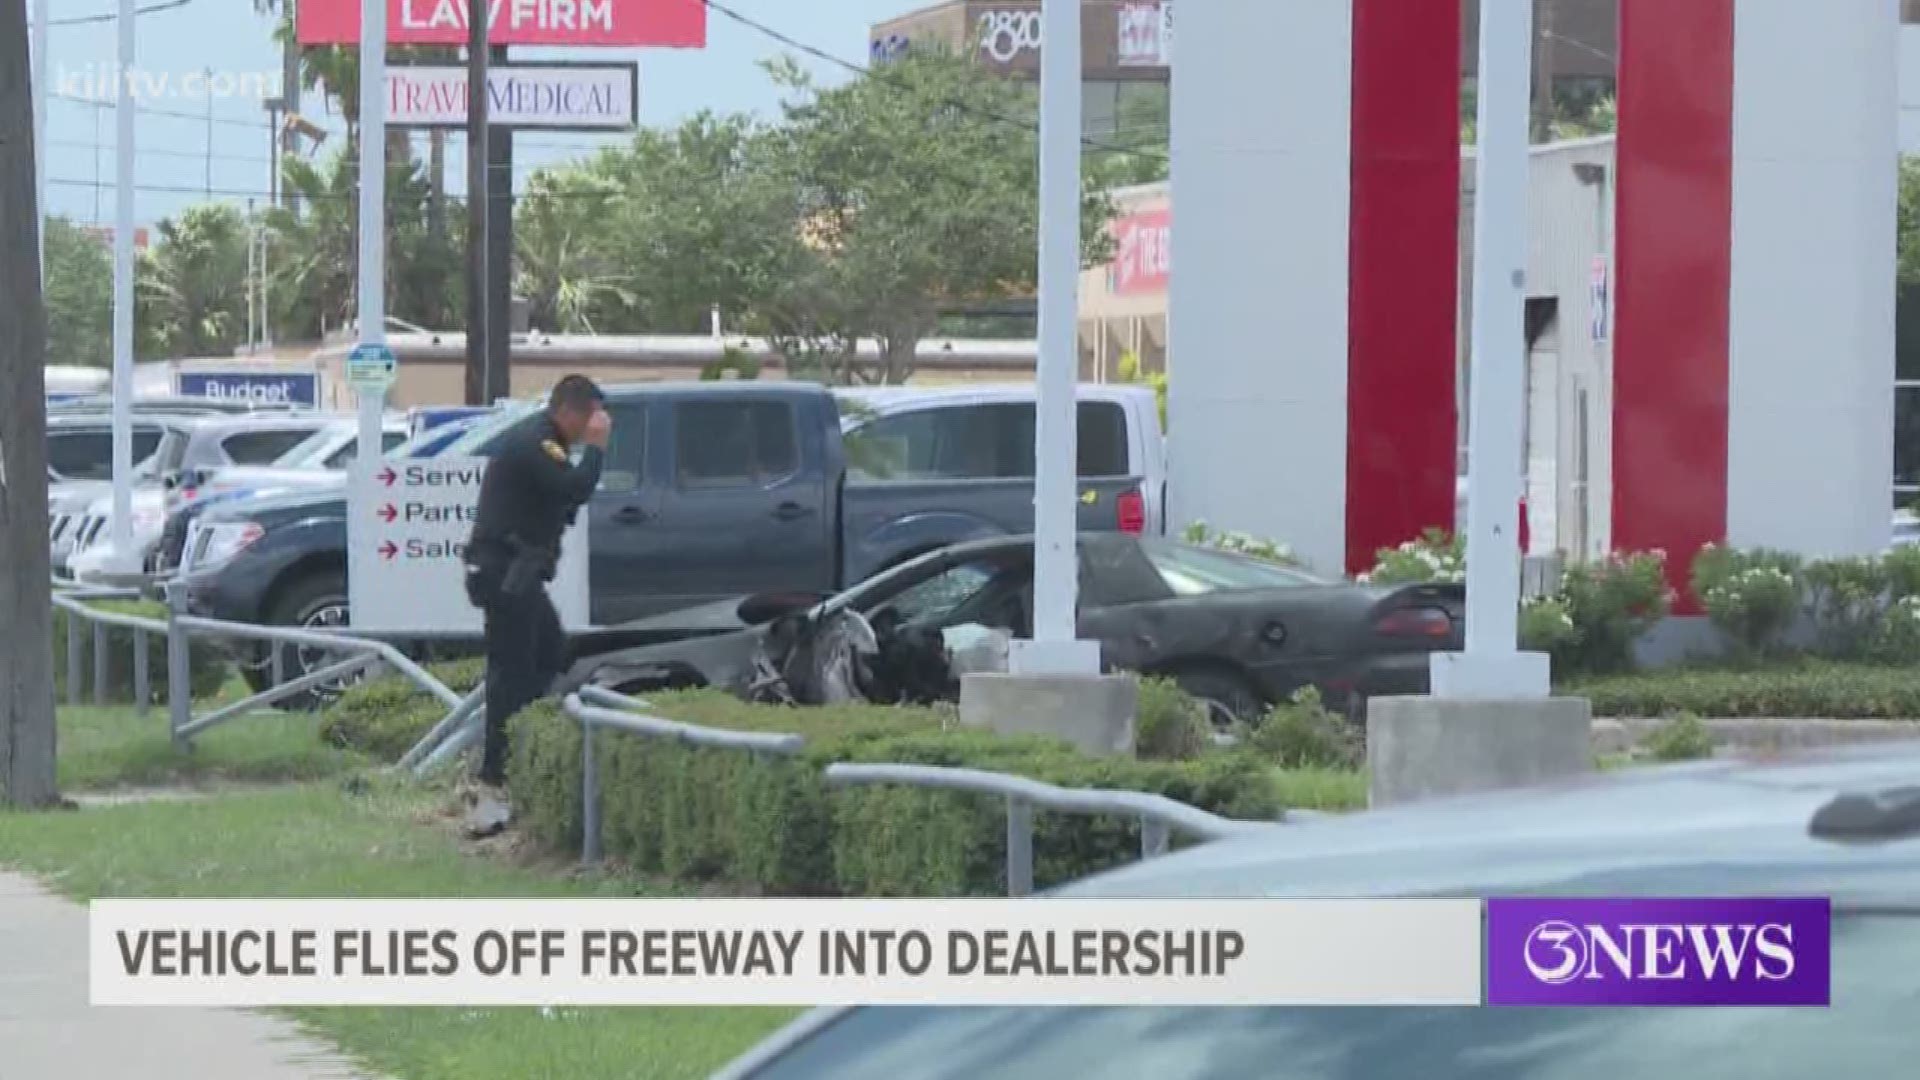 According to authorities, a driver in his 20s drove off the freeway in front of the Ed Hicks Nissan dealership, crashing into one of their display cars.